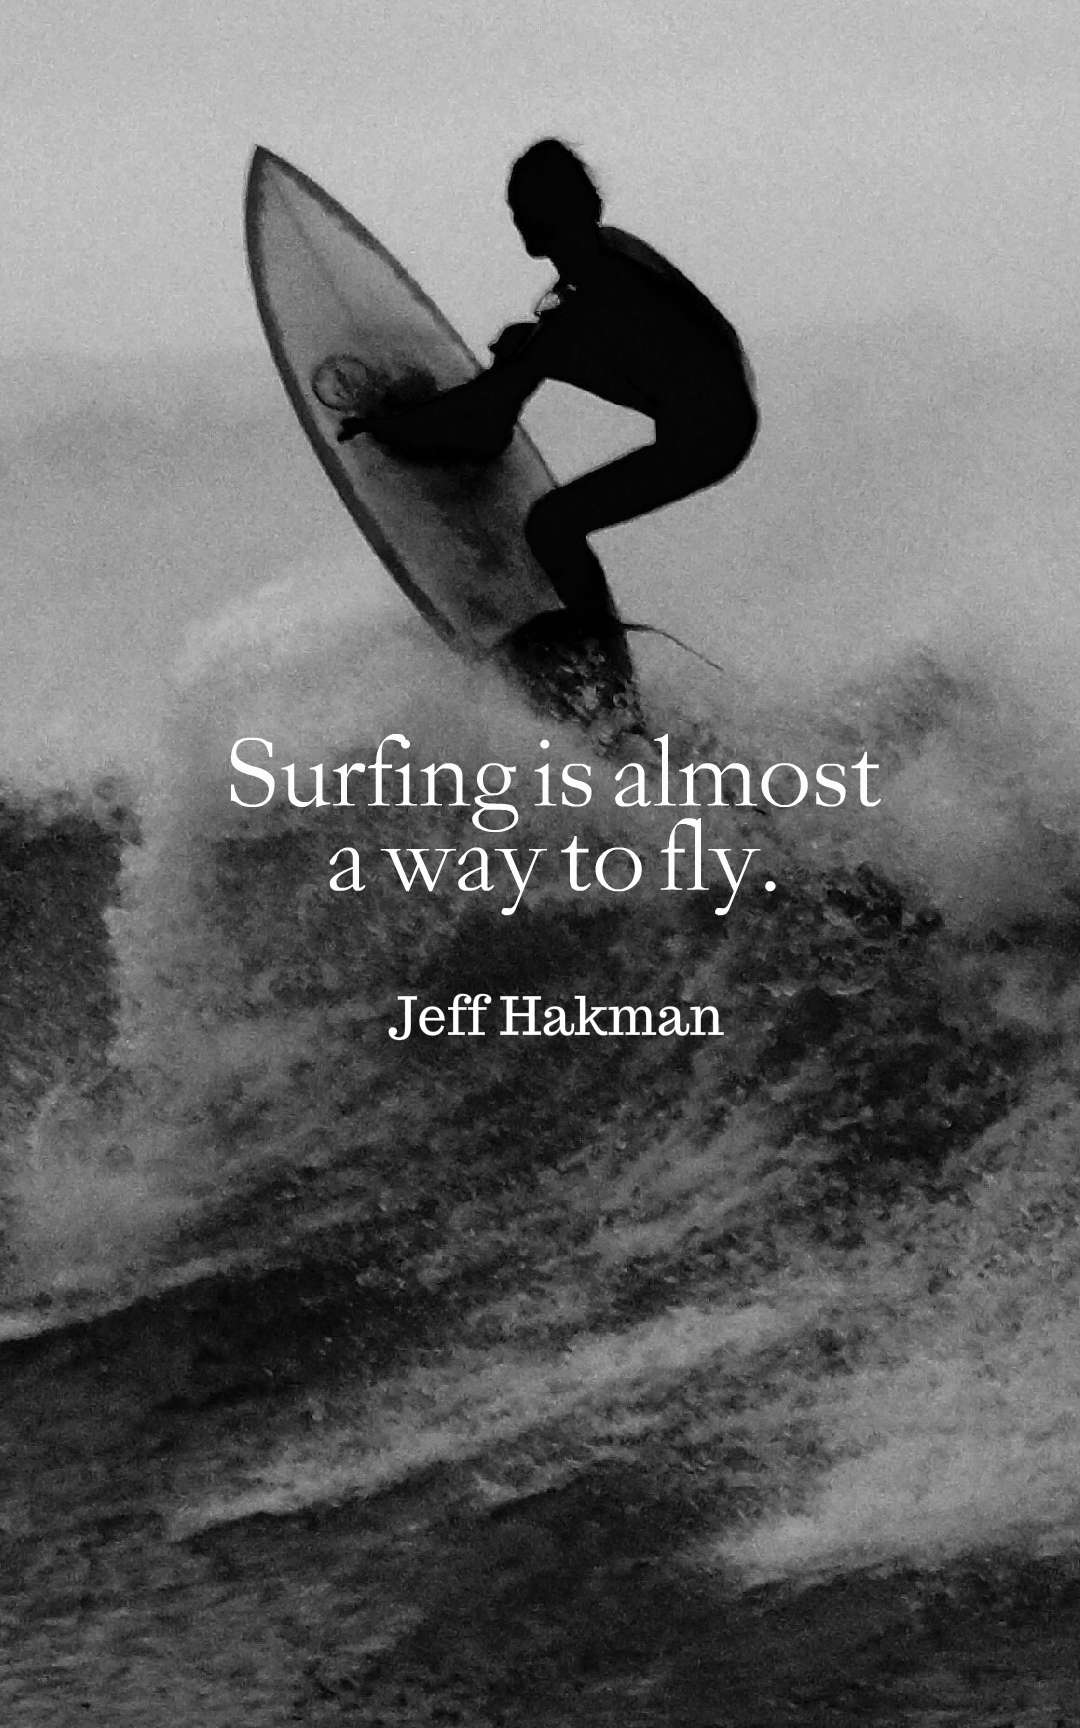 Surfing is almost a way to fly.